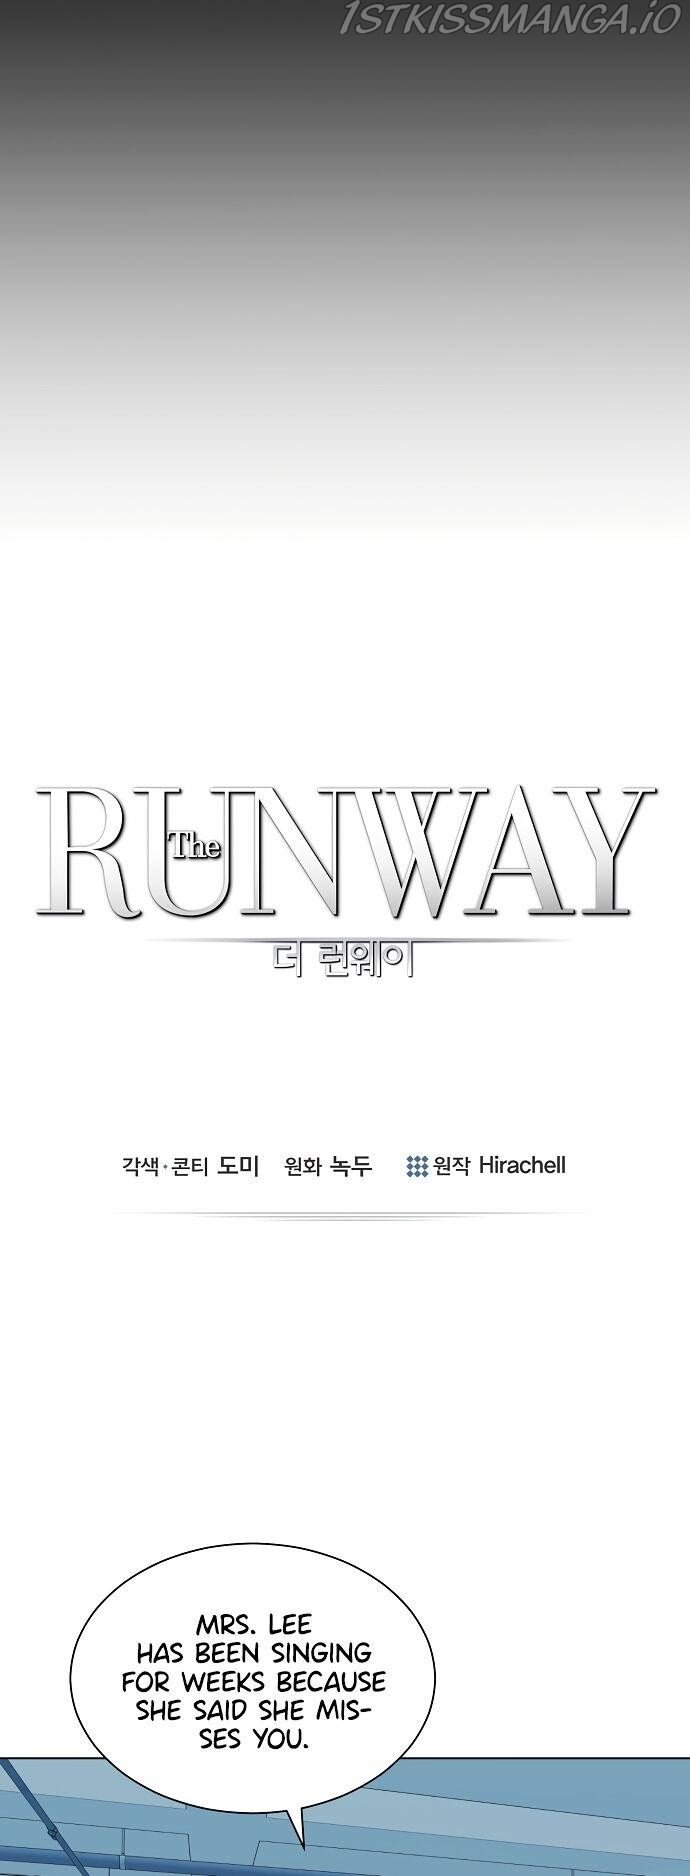 THE Runway chapter 7